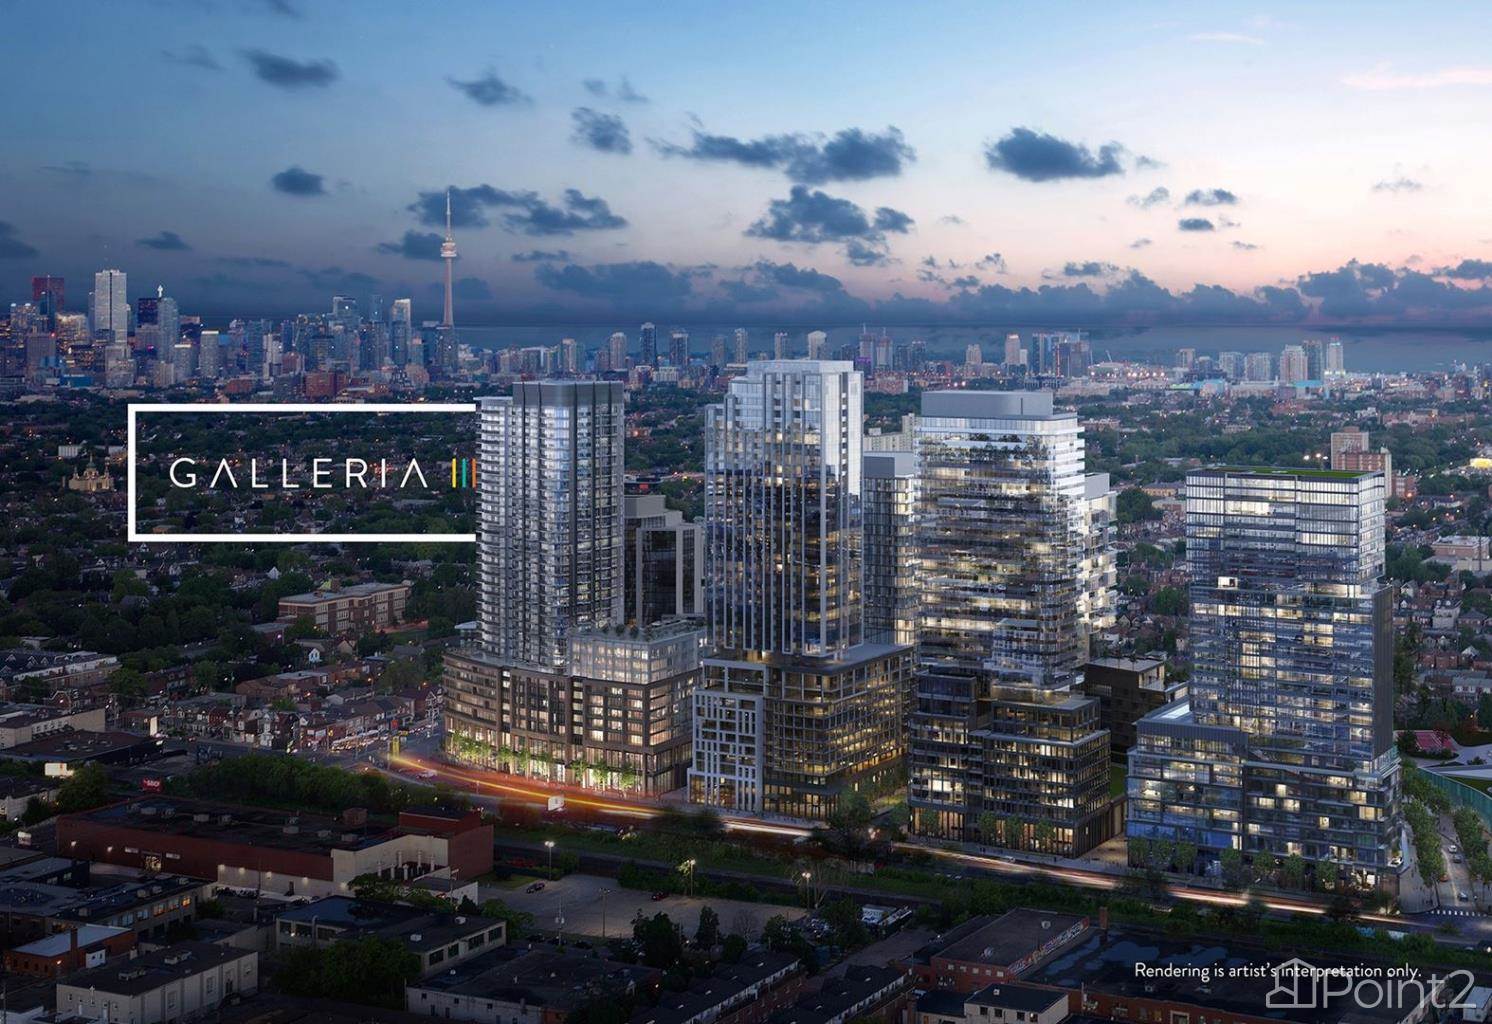 Galleria Iii Condos Insider Vip Access At Dufferin Dupont, Toronto, ON M6H2A6 Photo 3